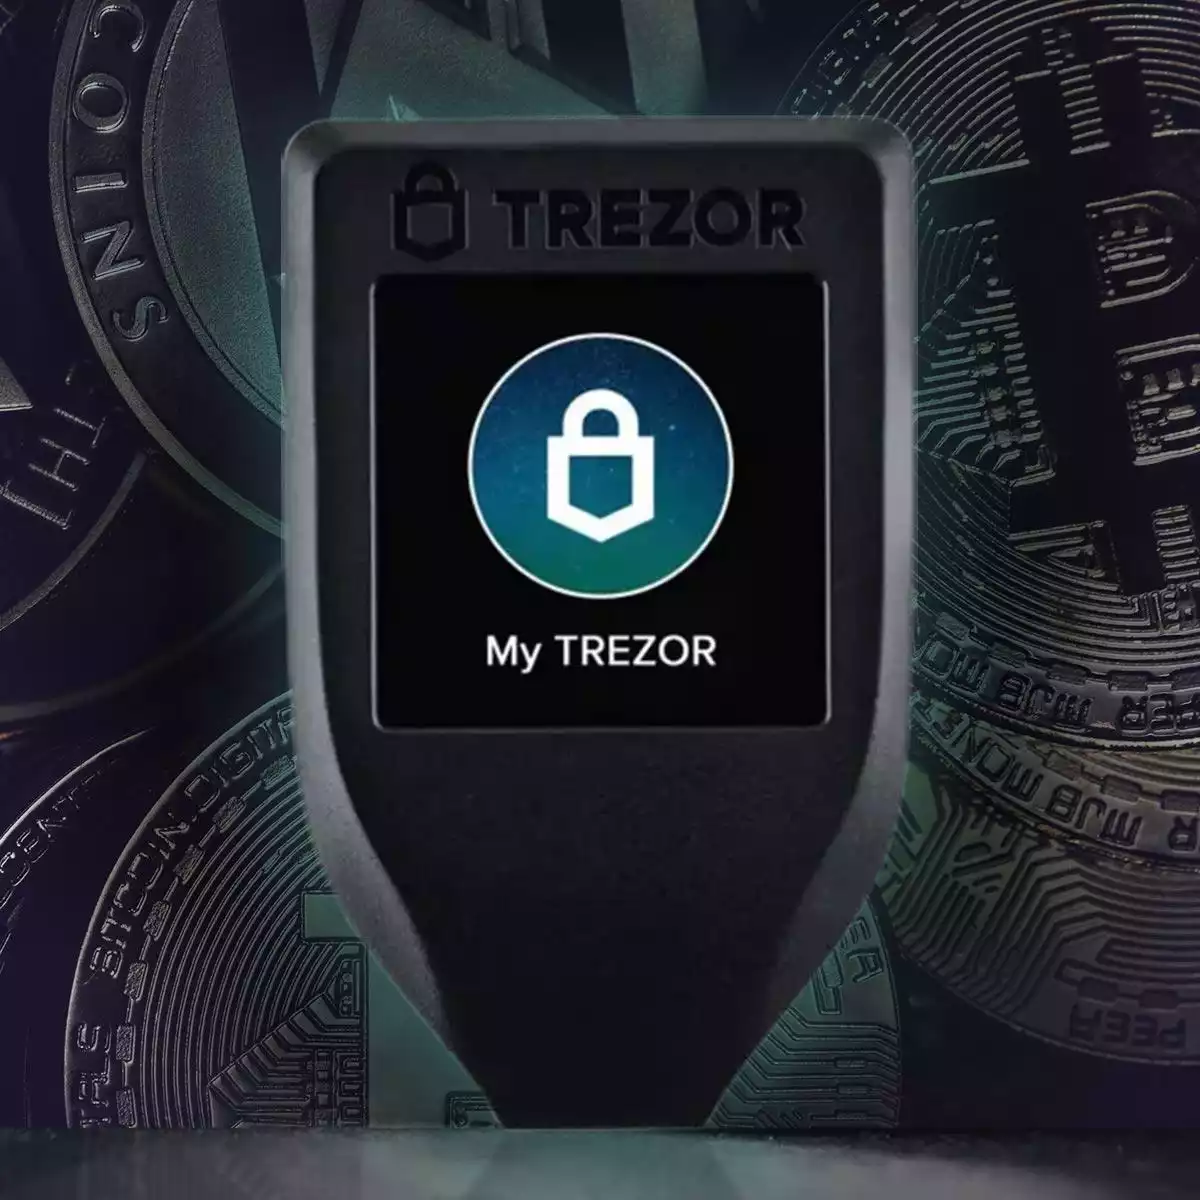 trezor is a multi-purpose device. it’s most popularised function helps secure bitcoin and altcoin transactions. it is also a powerful password manager...